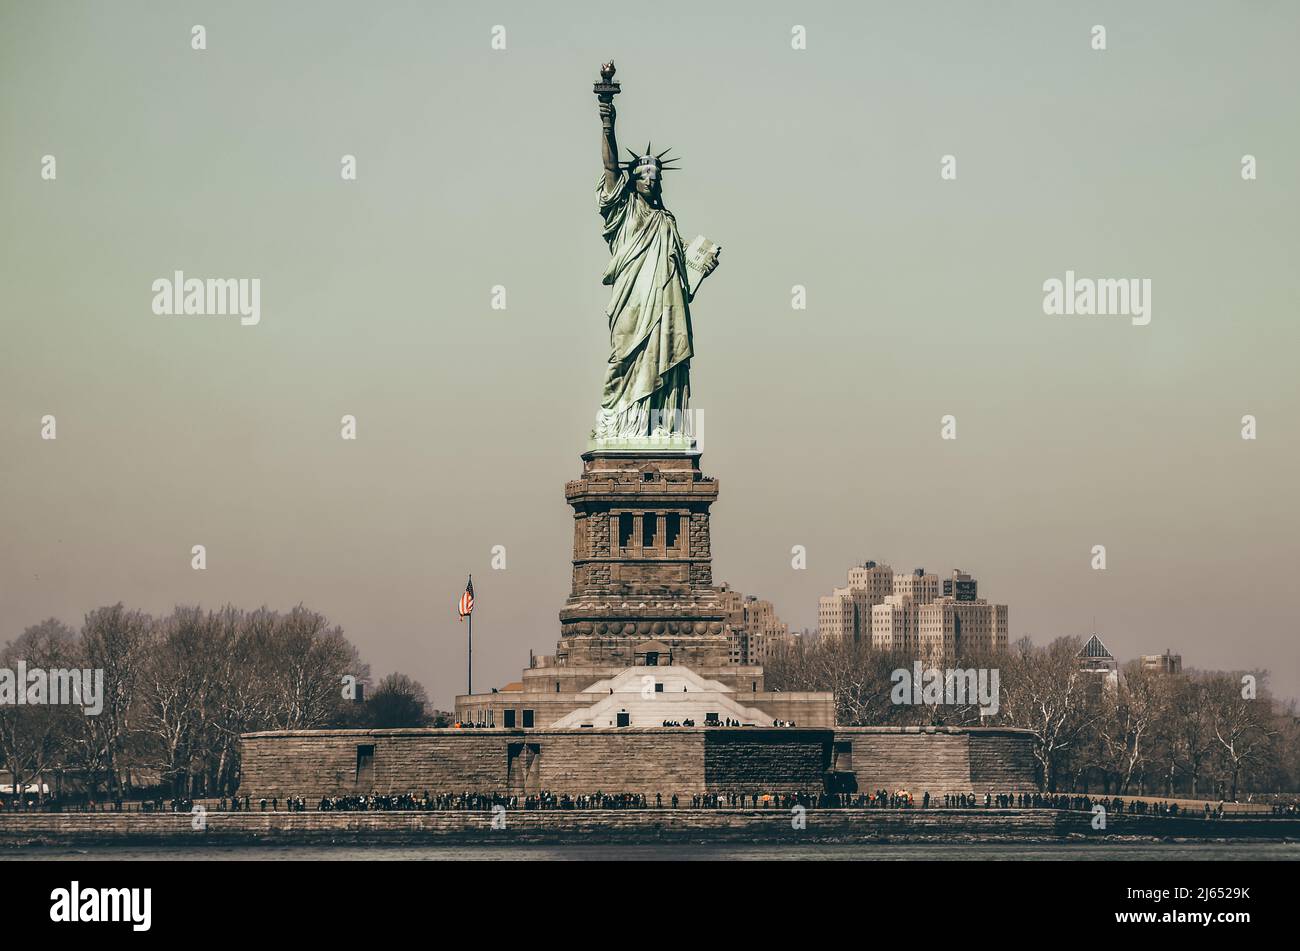 The Statue of Liberty in New York City Stock Photo